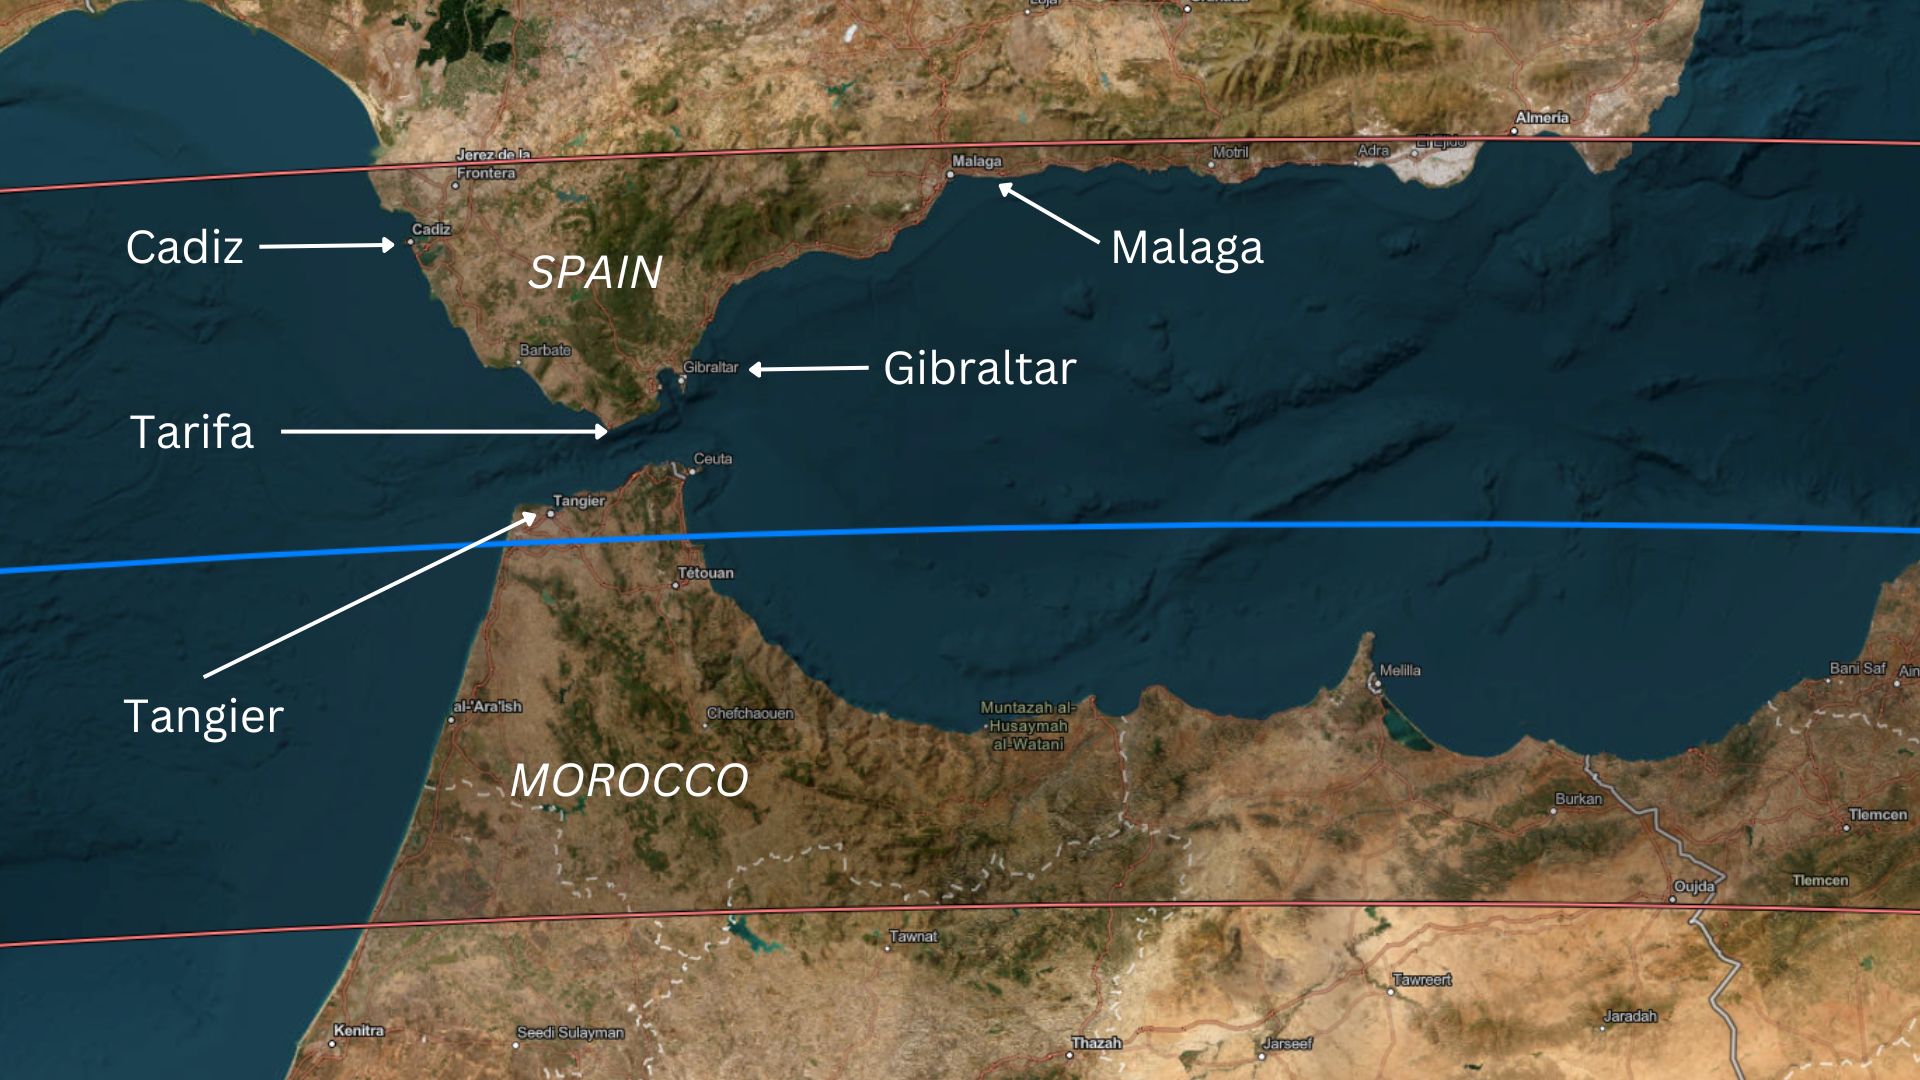 A map showing the path of the total solar eclipse passing over the northern tip of Morocco and the southern tip of Spain at Tarifa.